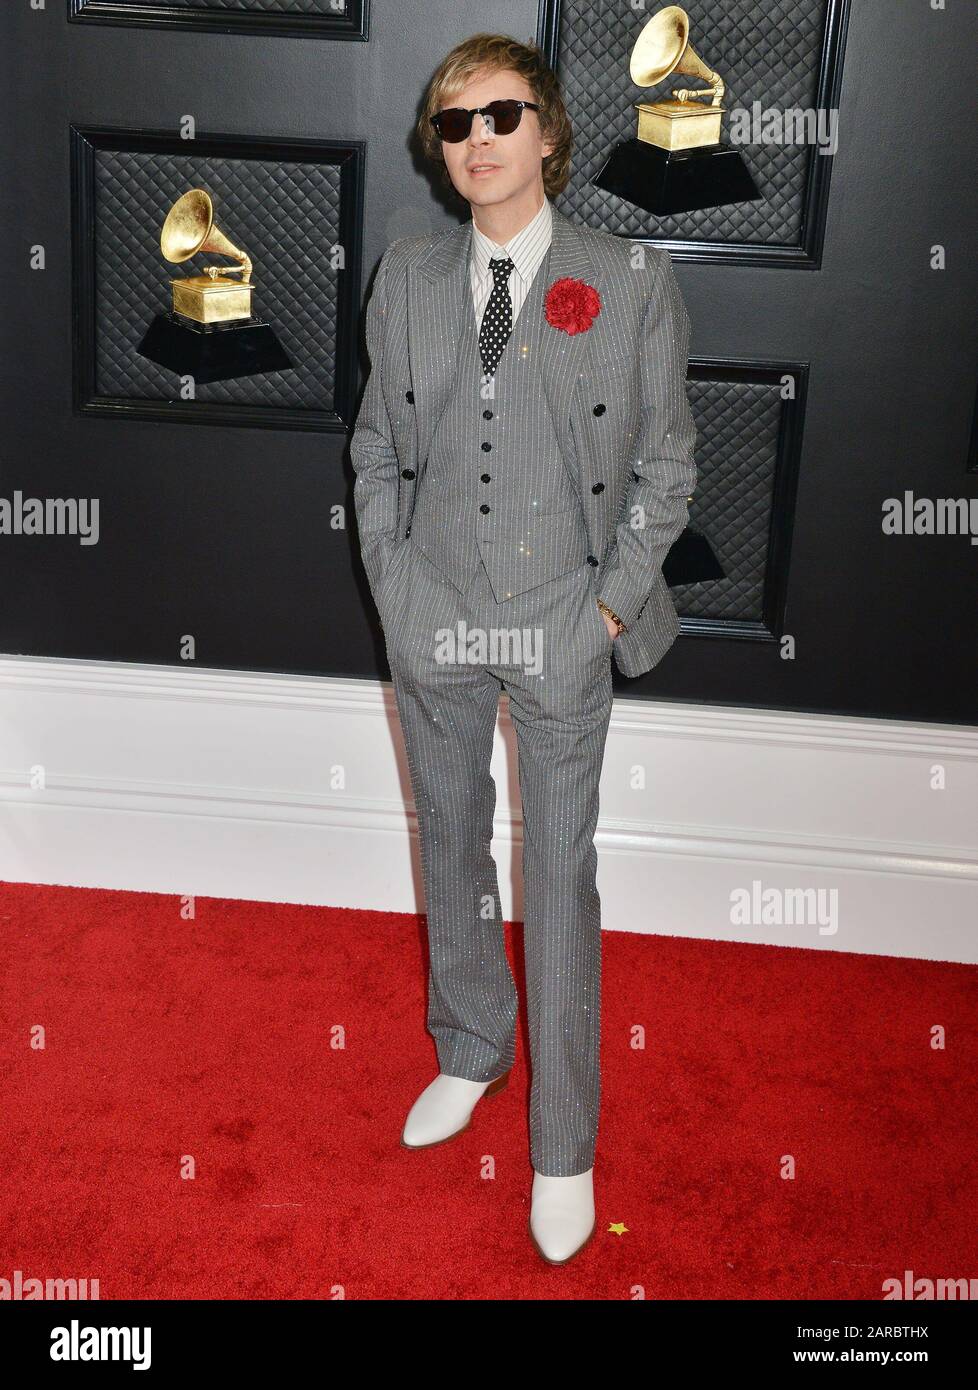 Los Angeles, CA. 26th Jan, 2020. Beck at arrivals for 62nd Annual Grammy Awards - Arrivals, STAPLES Center, Los Angeles, CA January 26, 2020. Credit: Tsuni/Everett Collection/Alamy Live News Stock Photo